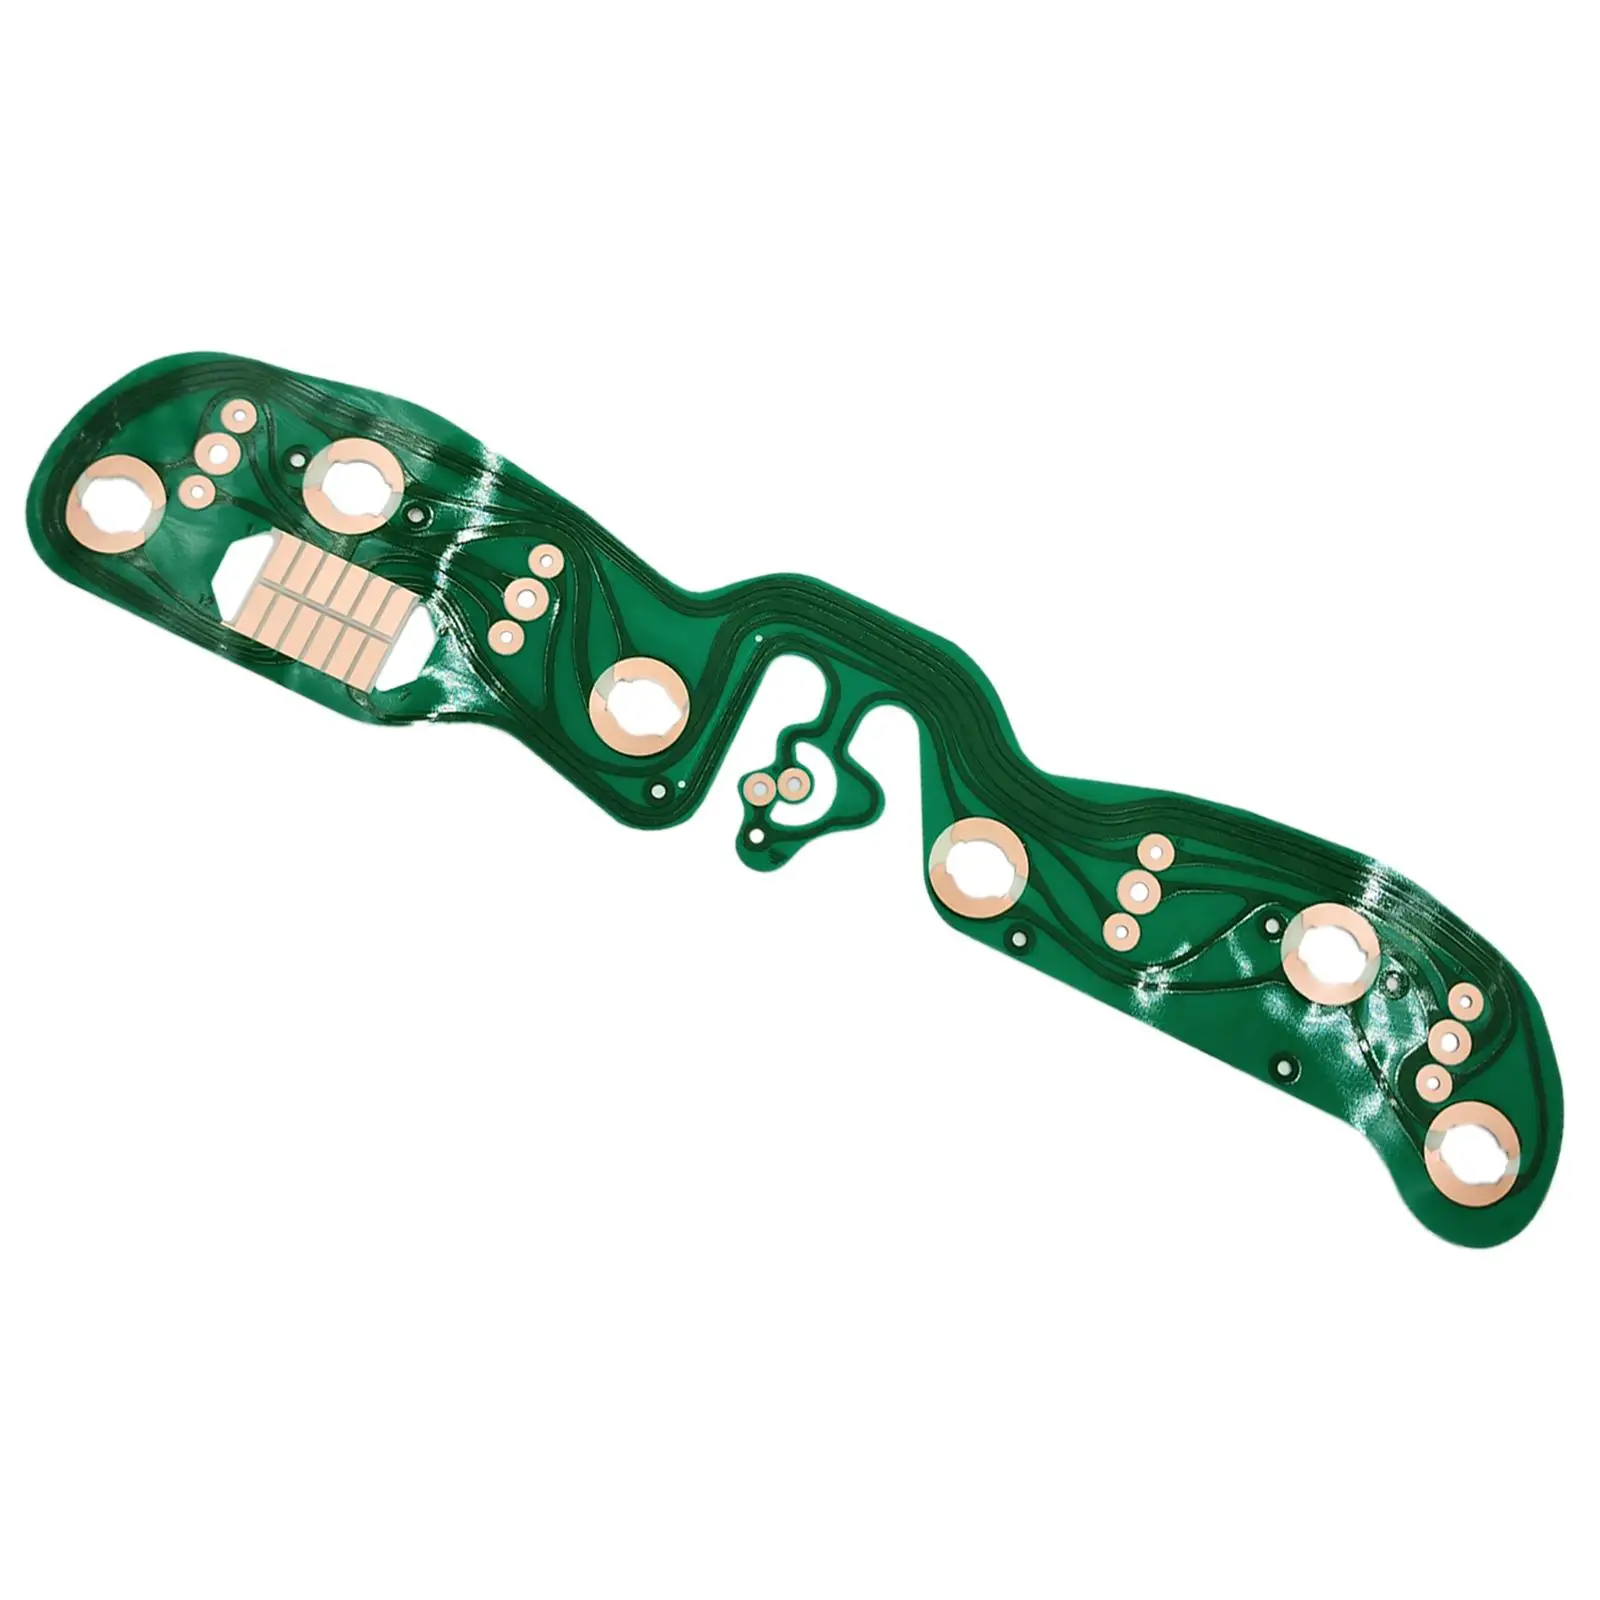 Gauges Printed Circuit Board for Jeep Wrangler Easy to Install Replaces